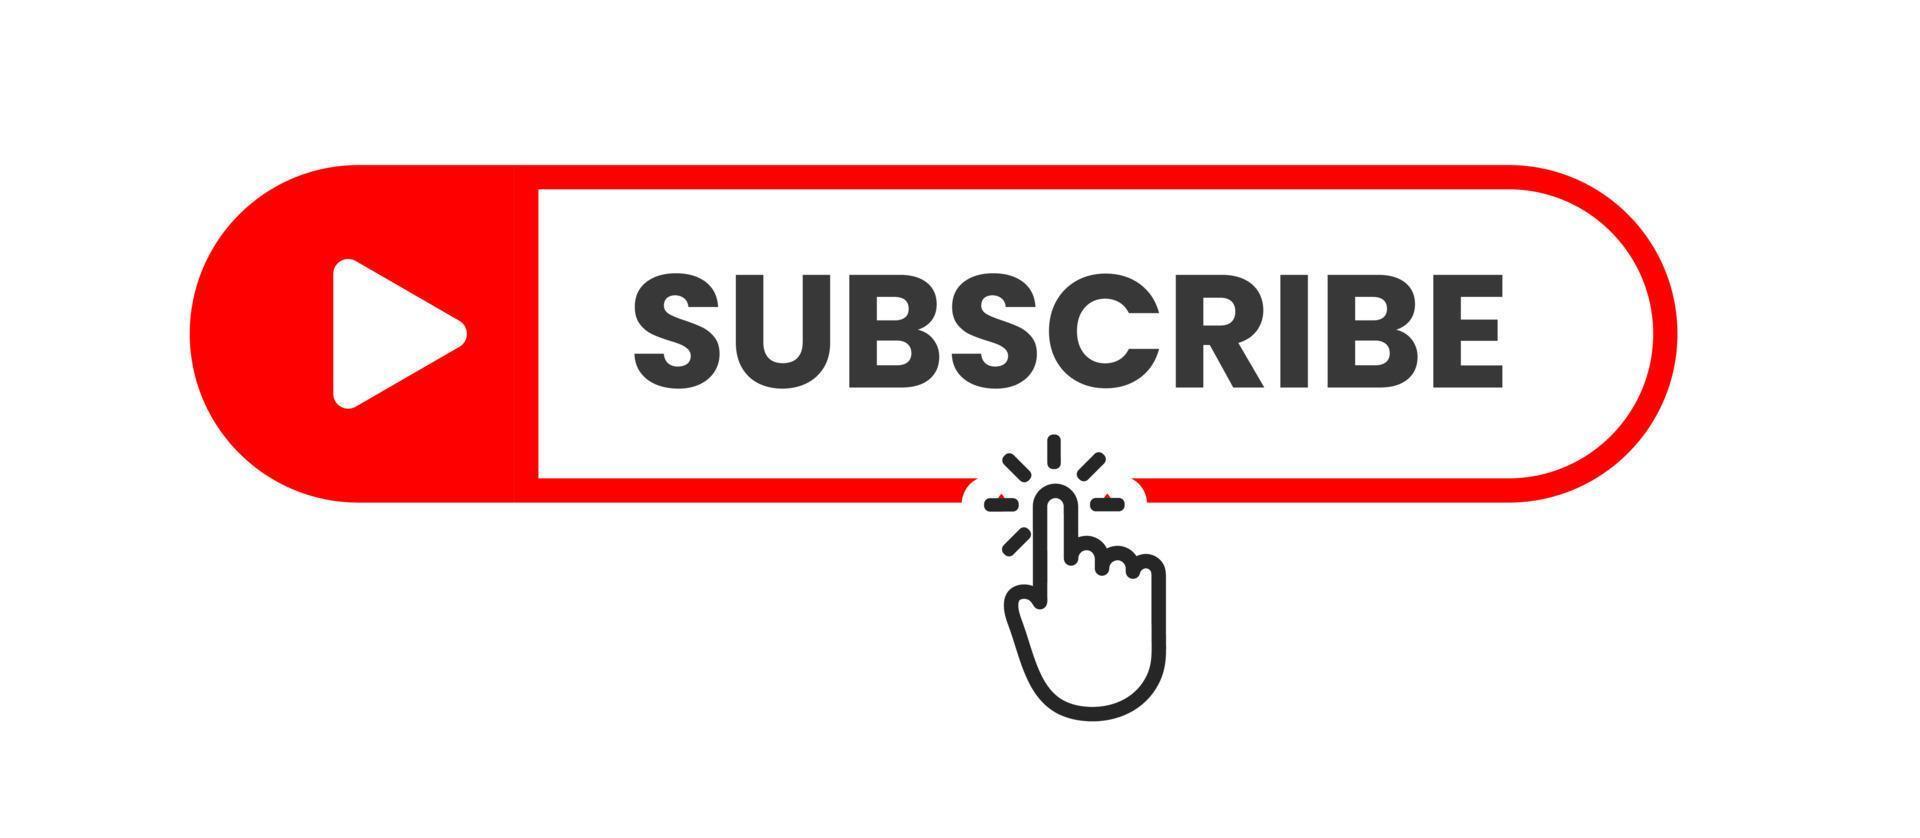 Subscribe button red color. vector illustration